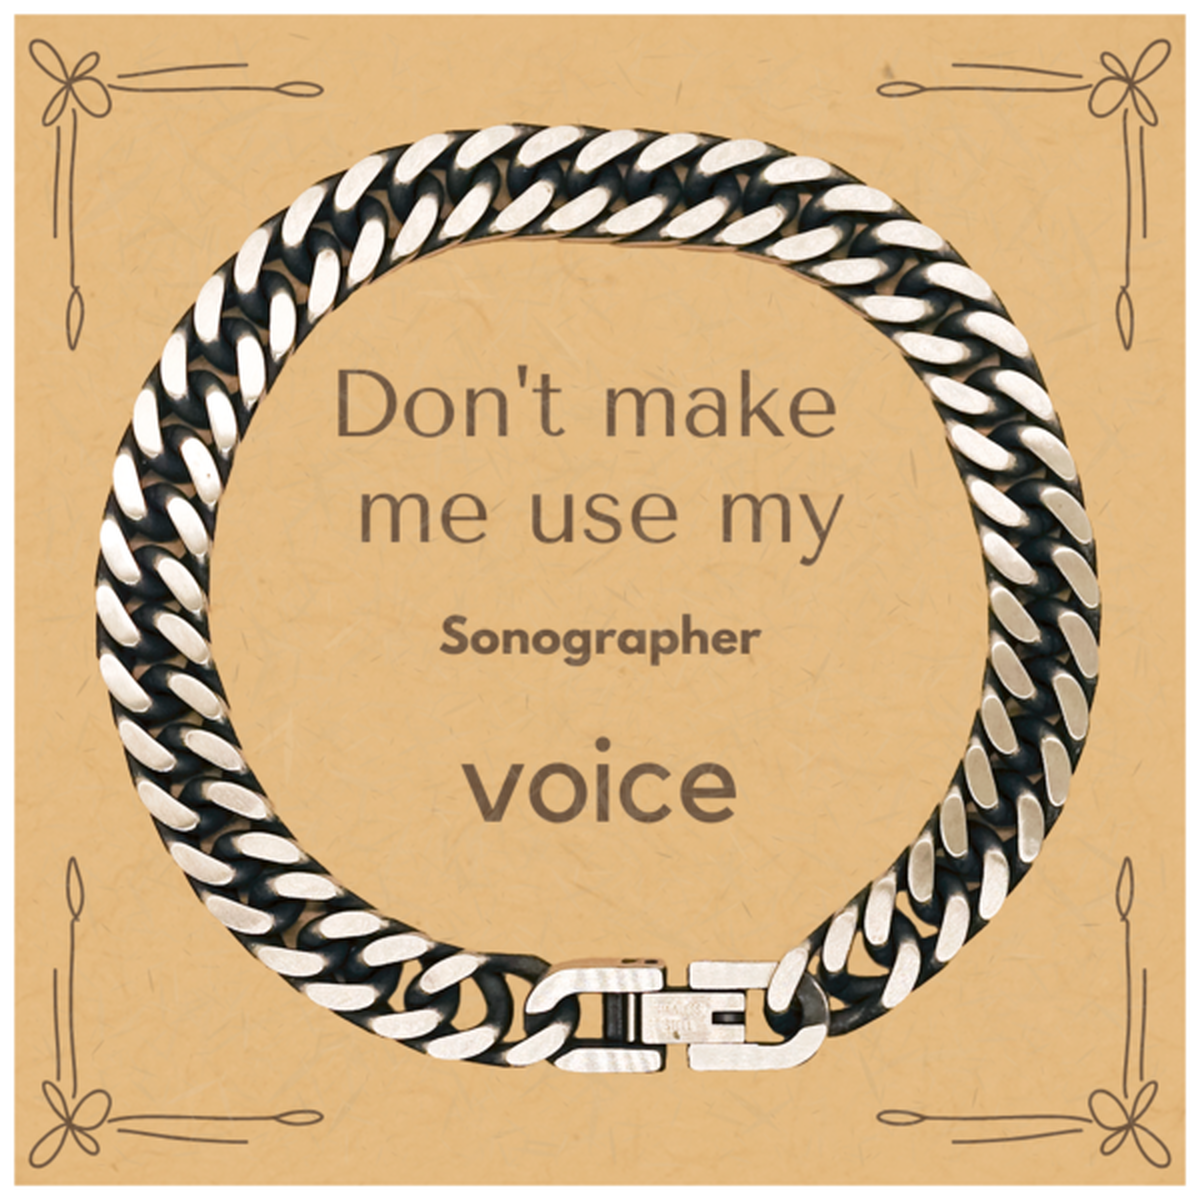 Don't make me use my Sonographer voice, Sarcasm Sonographer Card Gifts, Christmas Sonographer Cuban Link Chain Bracelet Birthday Unique Gifts For Sonographer Coworkers, Men, Women, Colleague, Friends